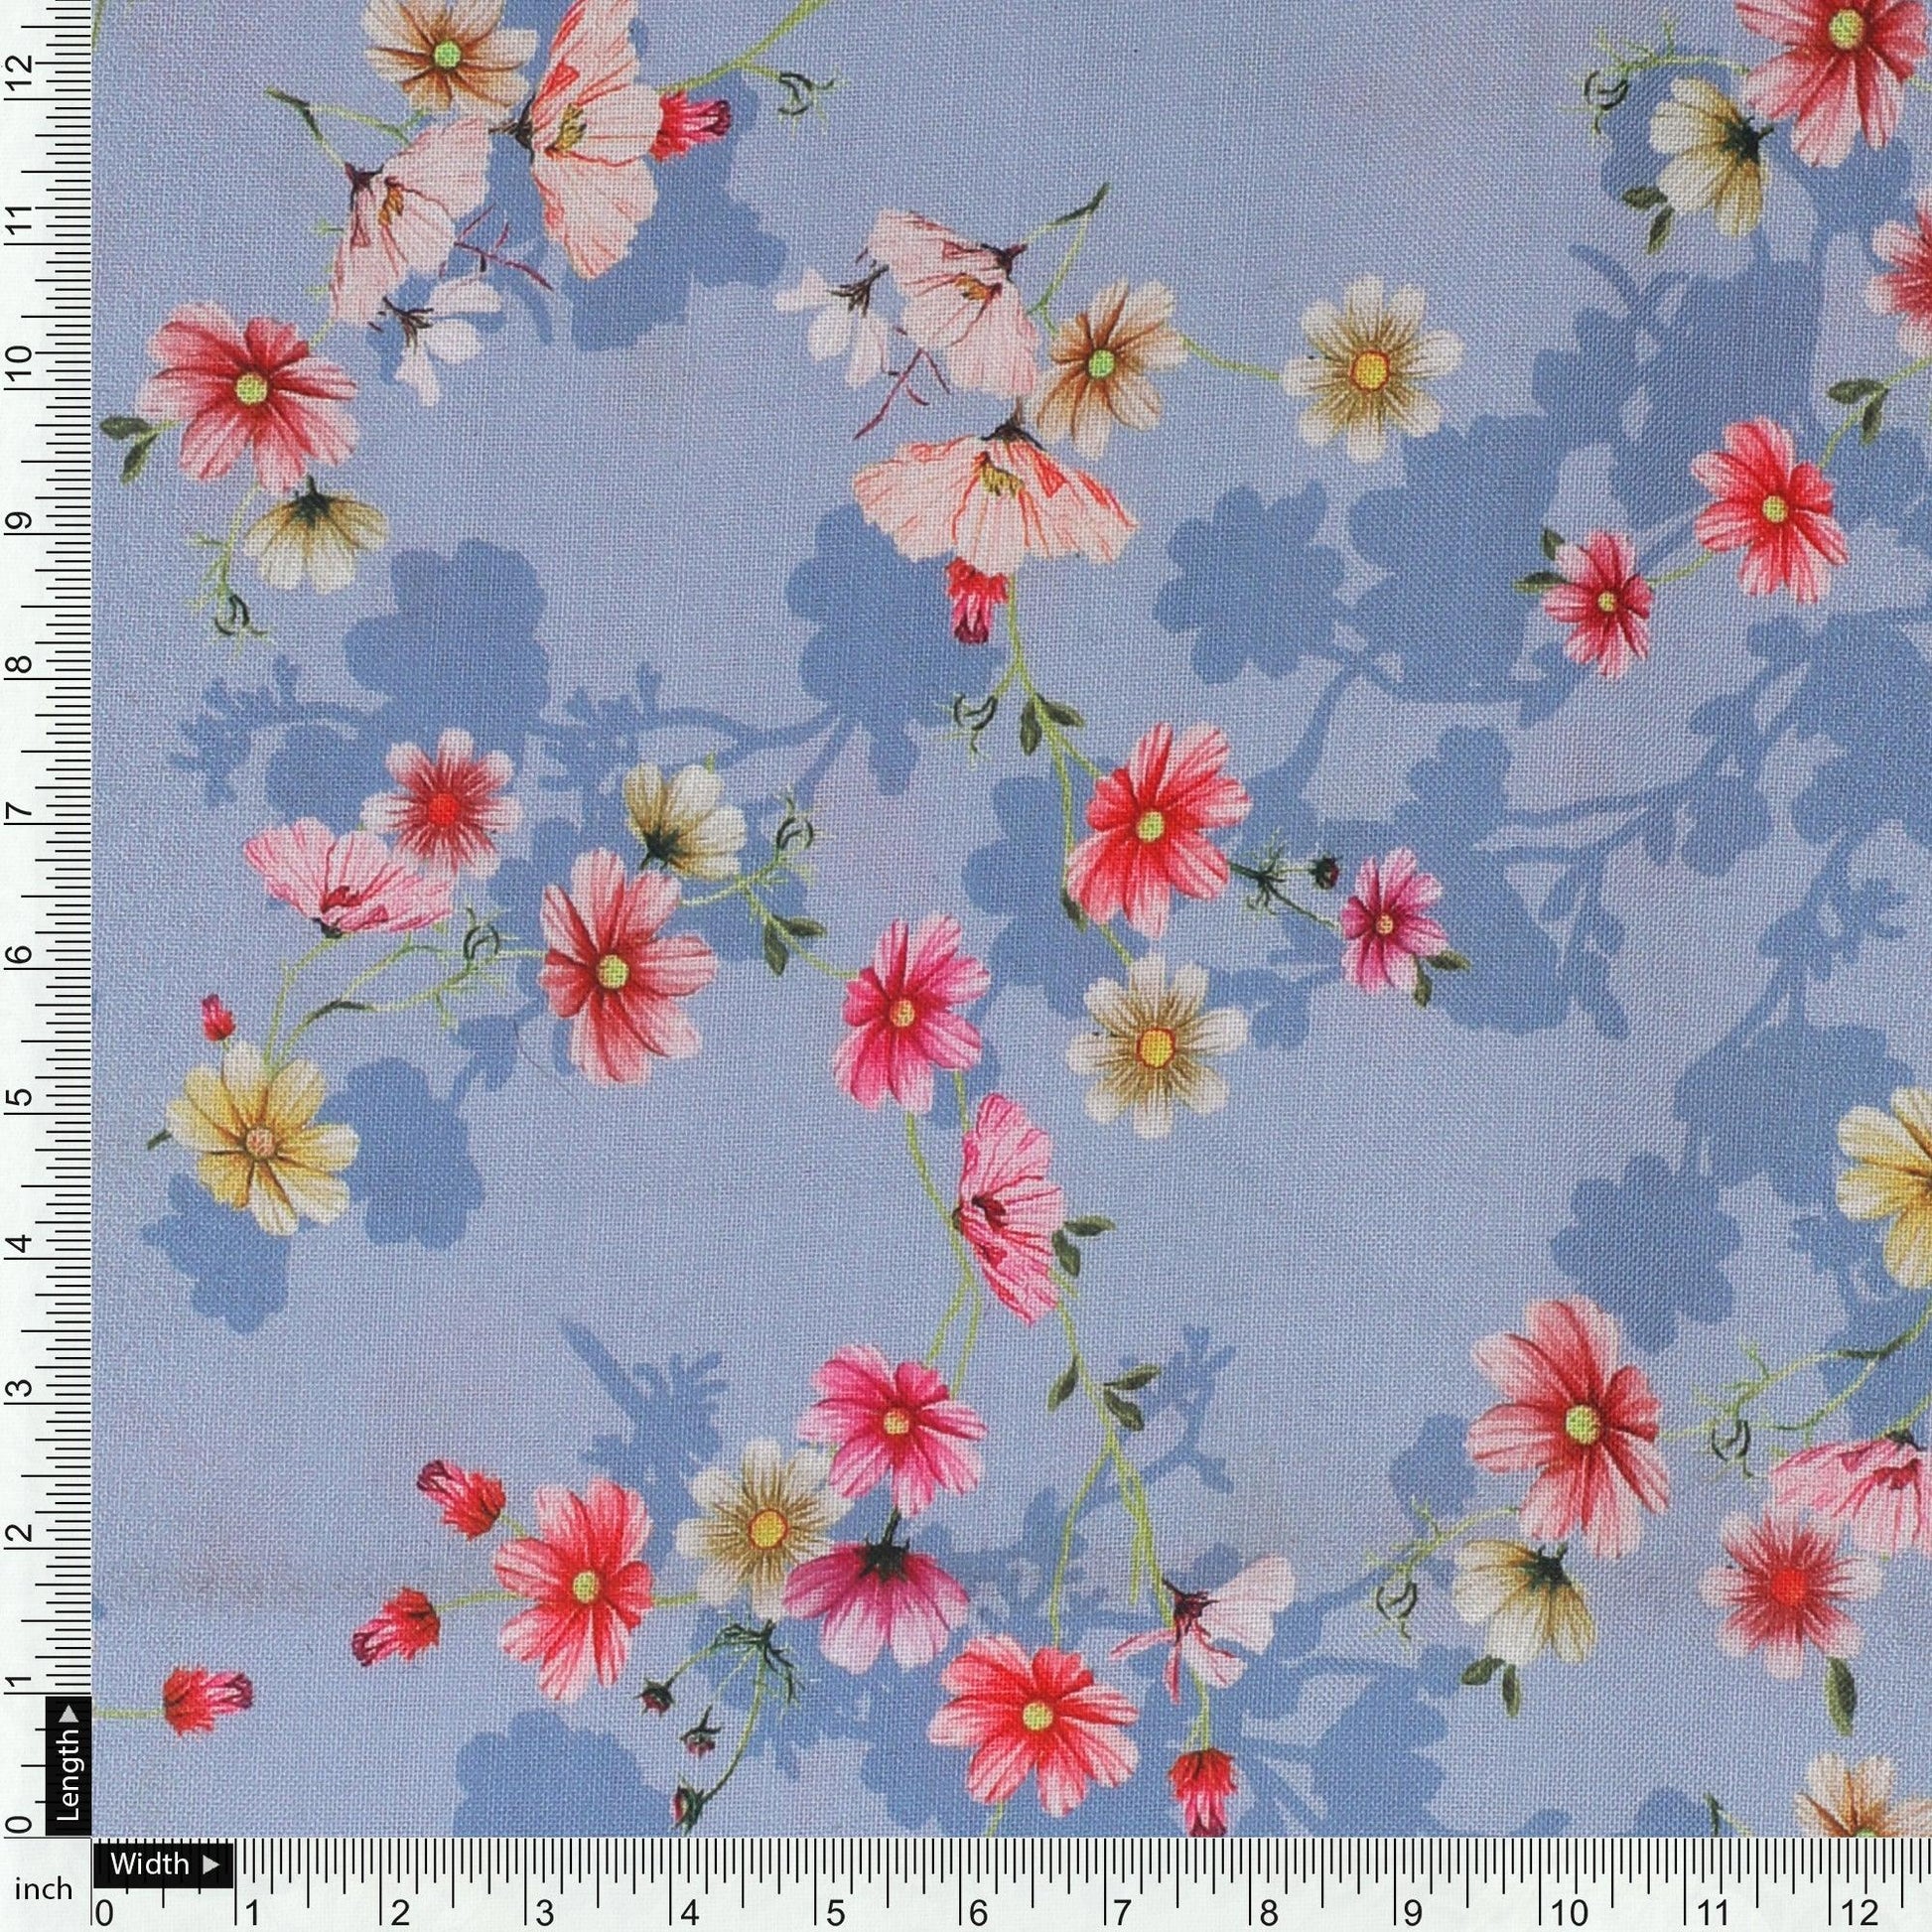 Colour Full Daisy With Spotted Background Digital Printed Fabric - Rayon - FAB VOGUE Studio®